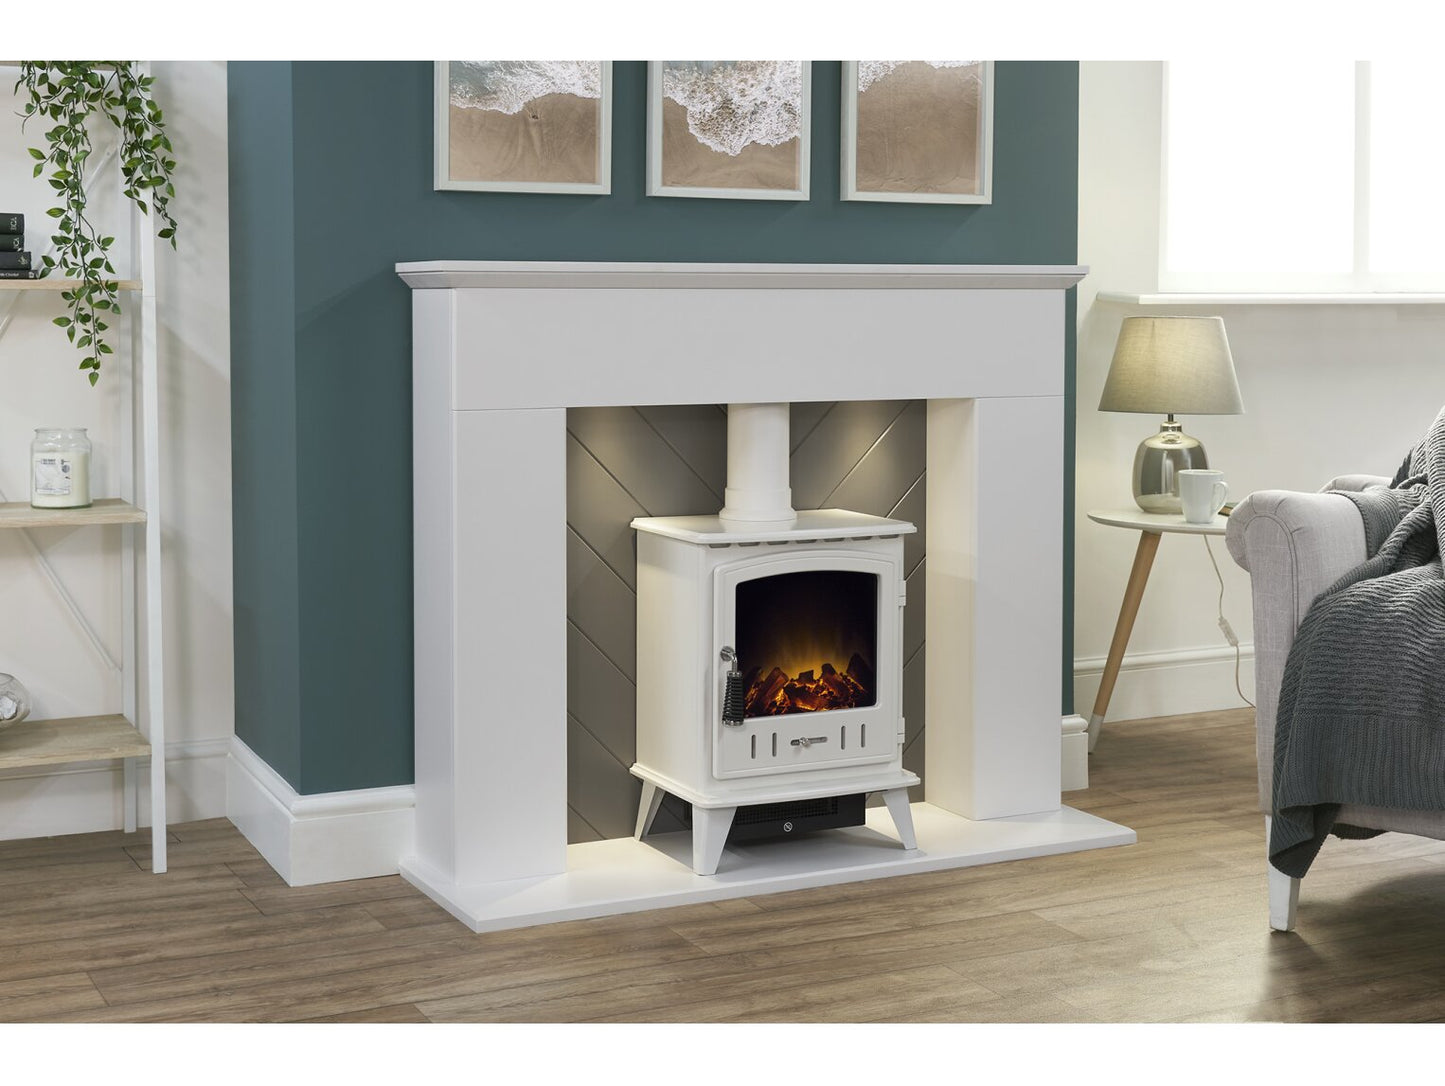 Adam Corinth Stove Fireplace with Downlights & Aviemore Electric Stove in 48 Inch 25450 Pure White & Grey